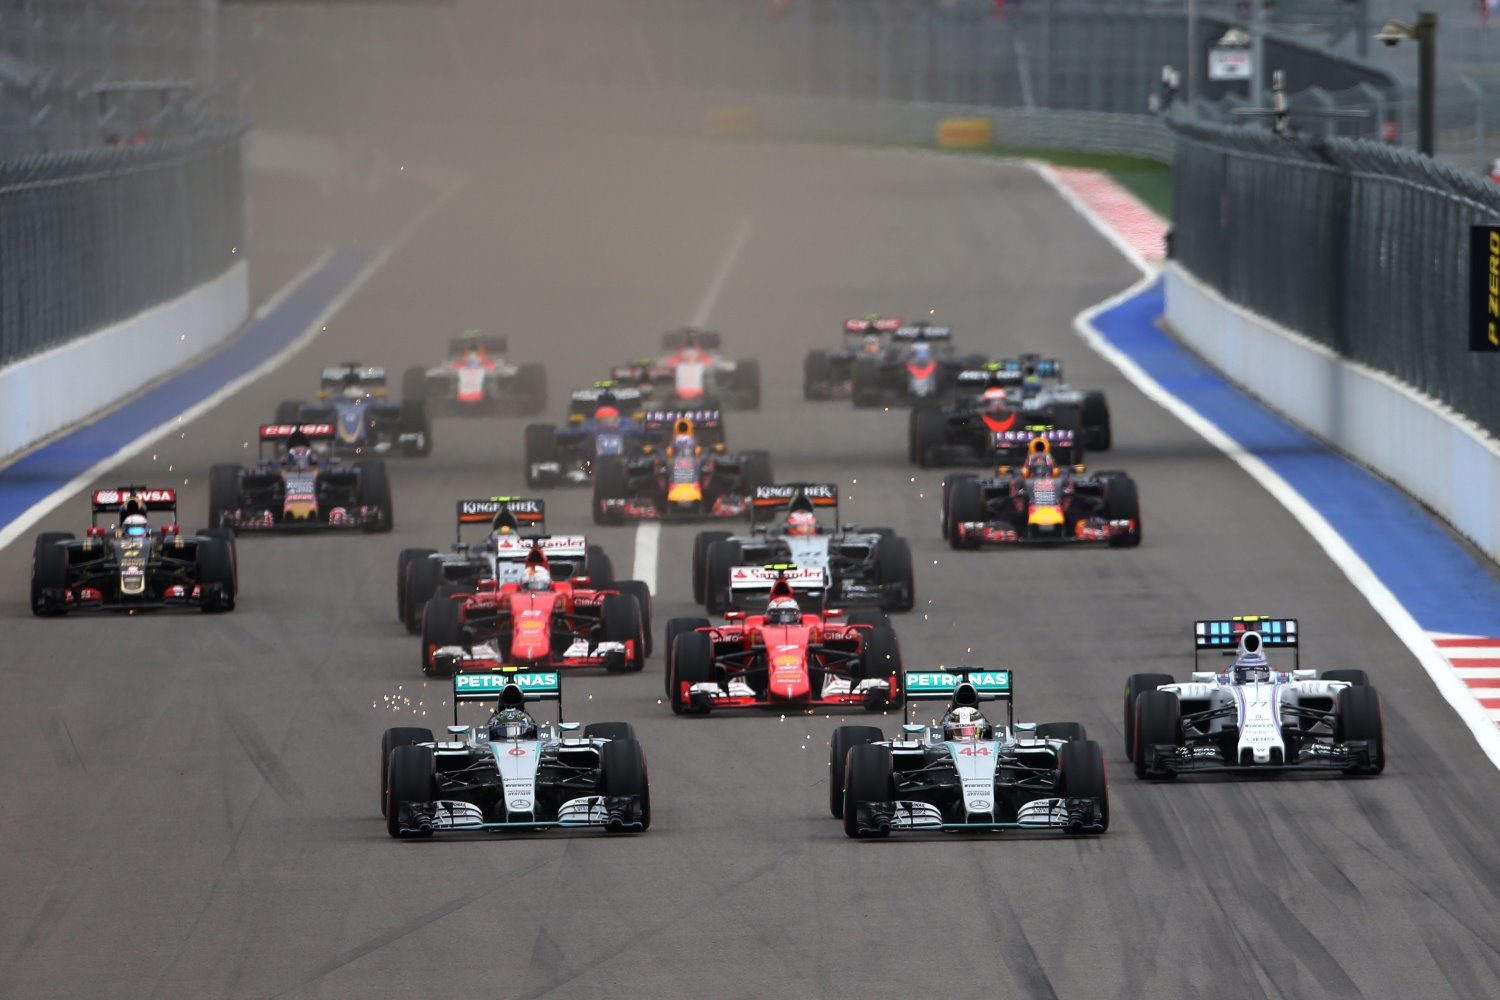 The three Mercedes powered cars take the lead at the start - Rosberg, Hamilton then Bottas